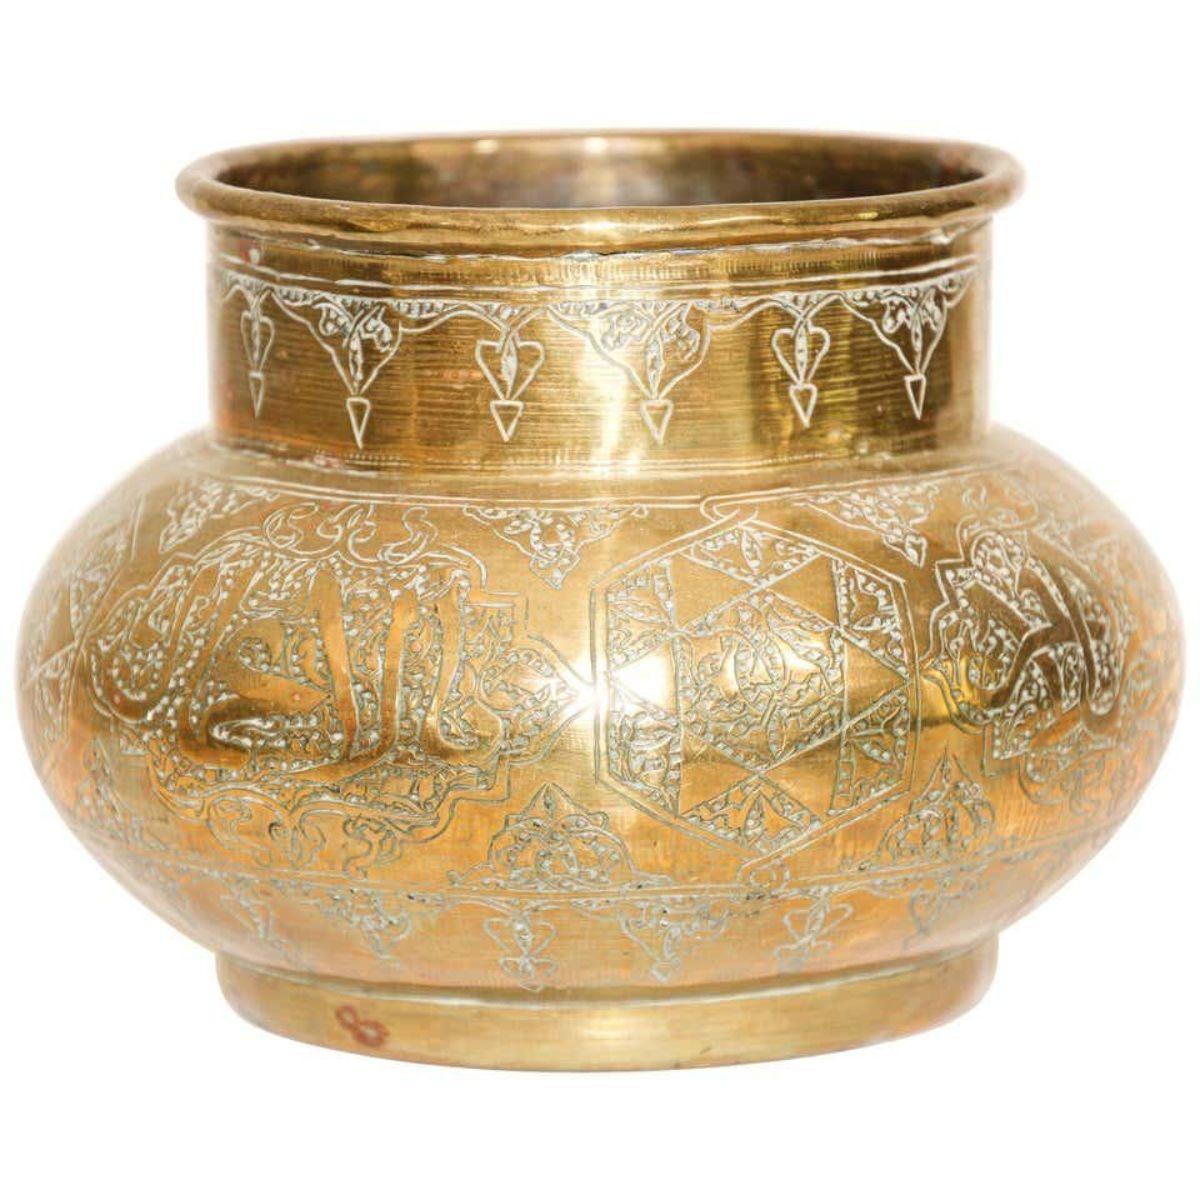 Antique Moorish Islamic Brass Bowl with Calligraphy Writing For Sale 7